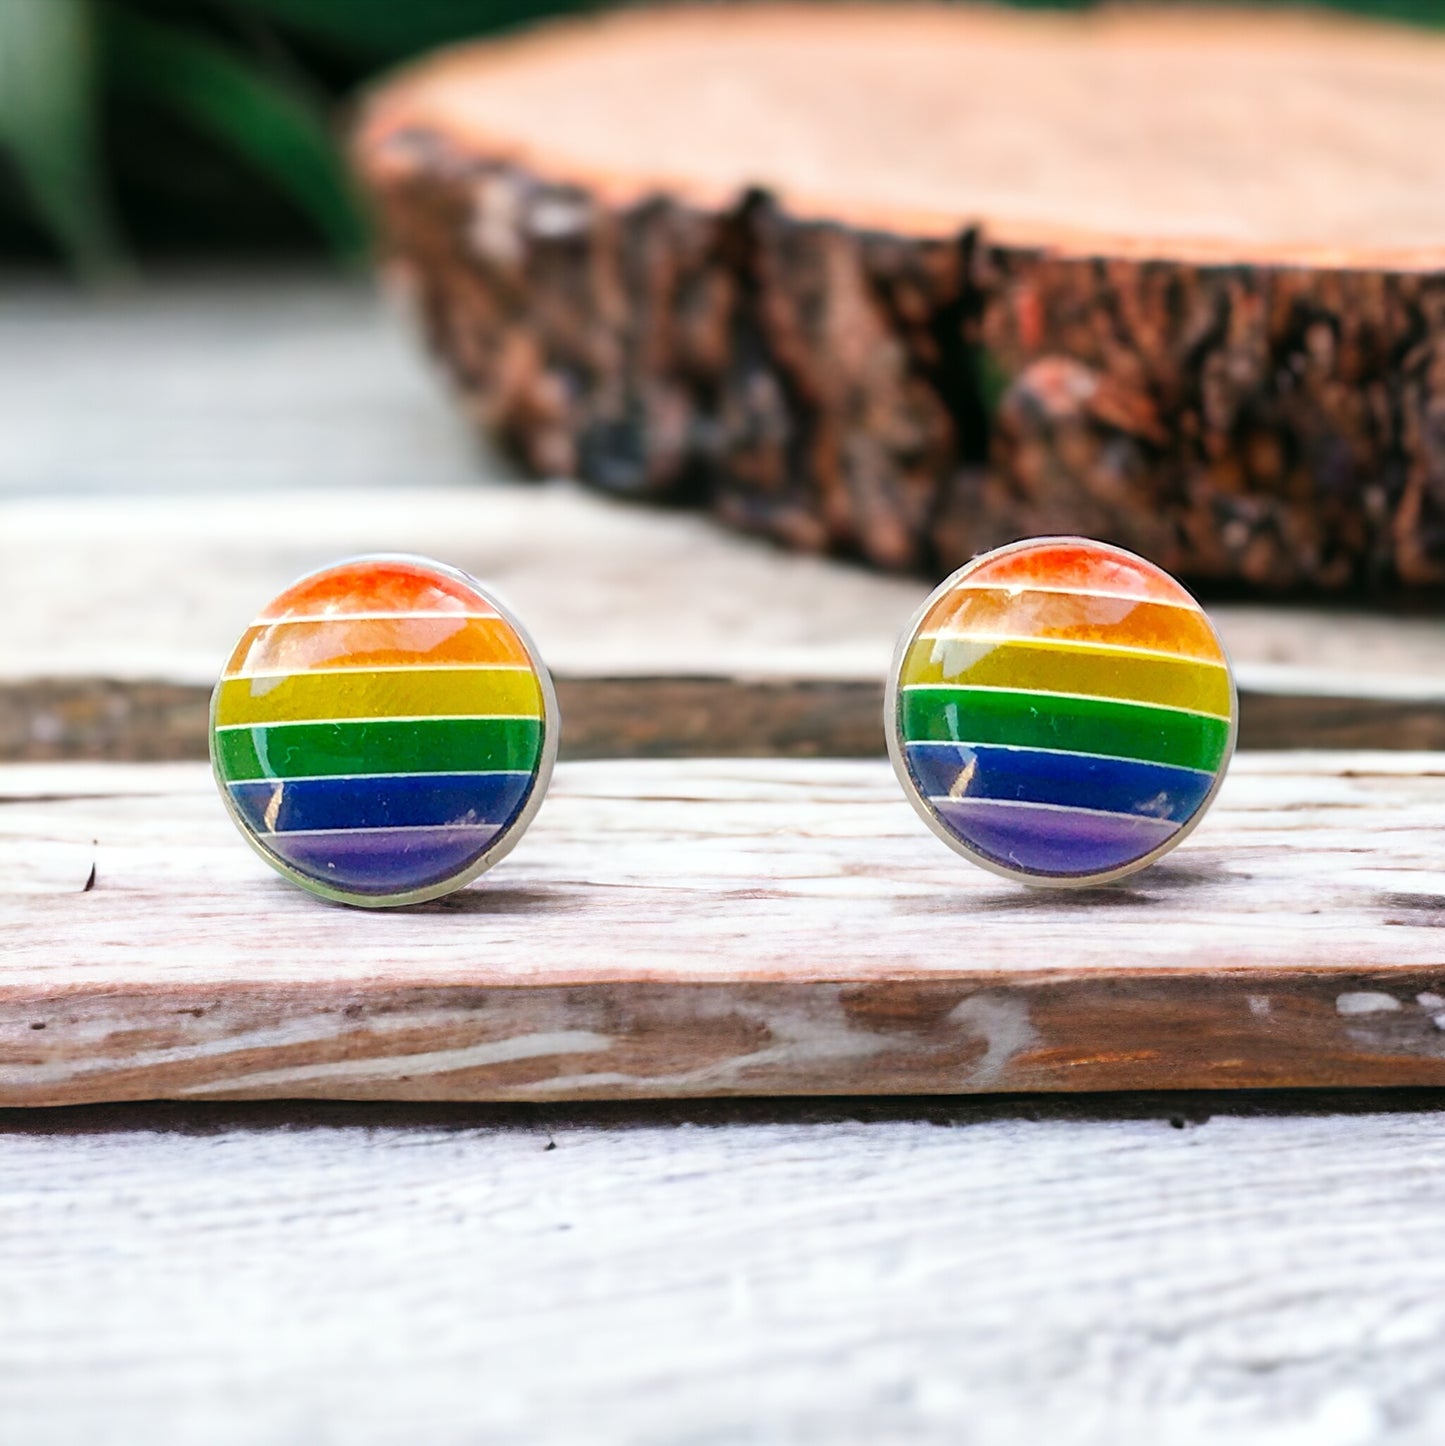 Rainbow Striped Silver Stud Earrings: Colorful & Chic Accessories for Every Day